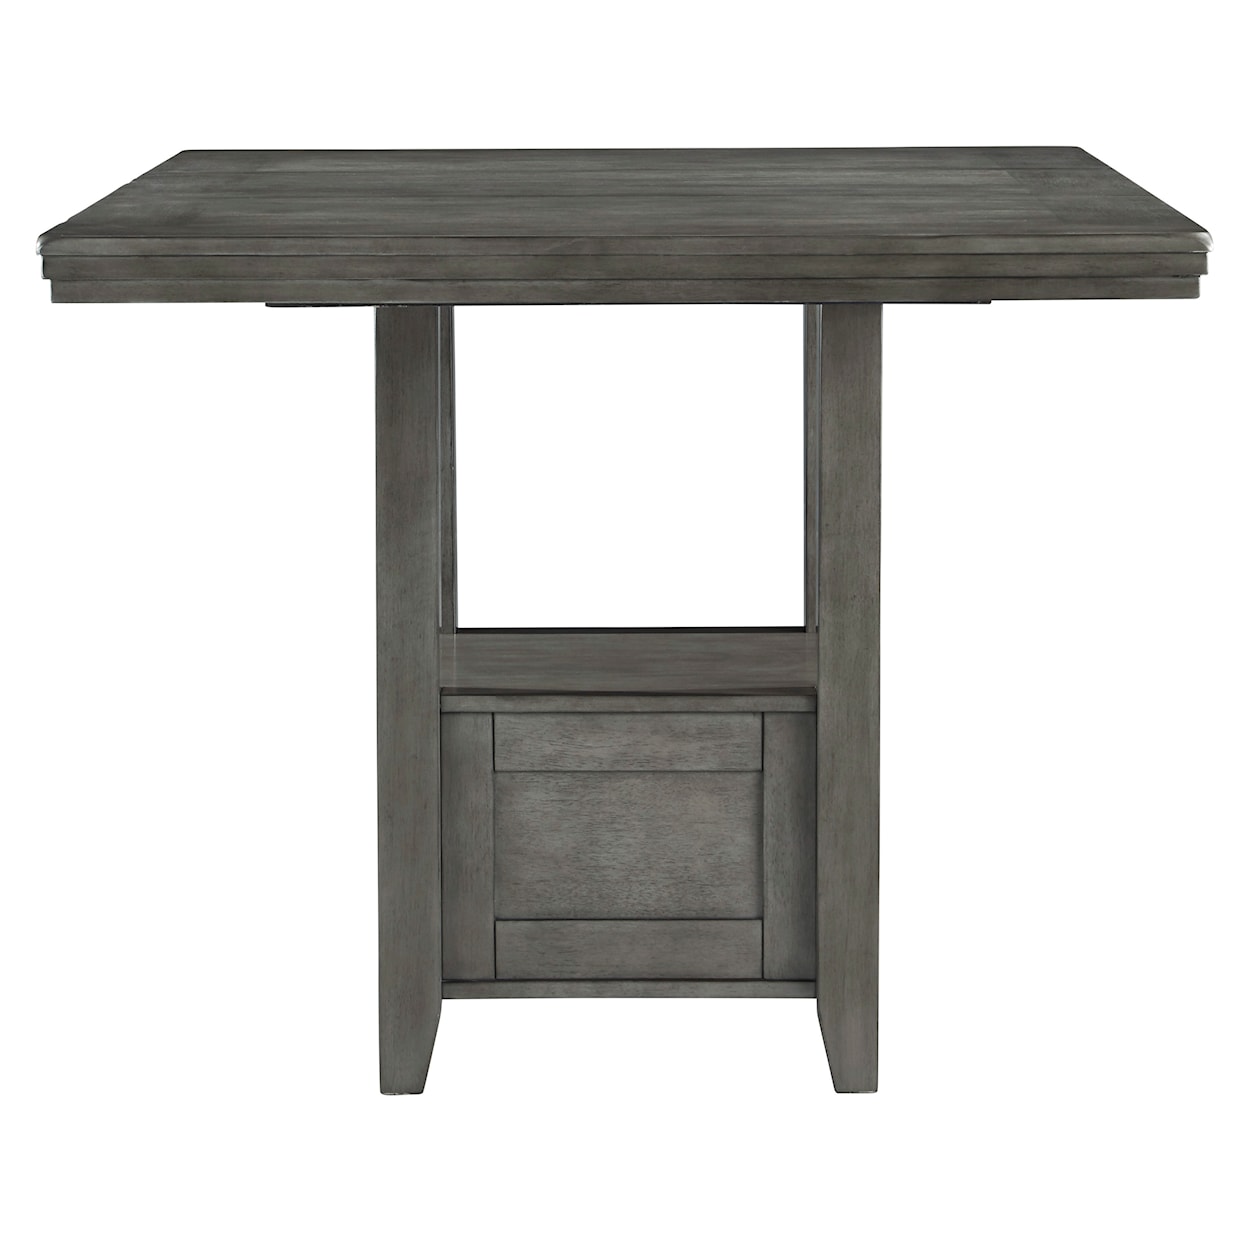 Signature Design Hallanden Counter Height Dining Extension Table